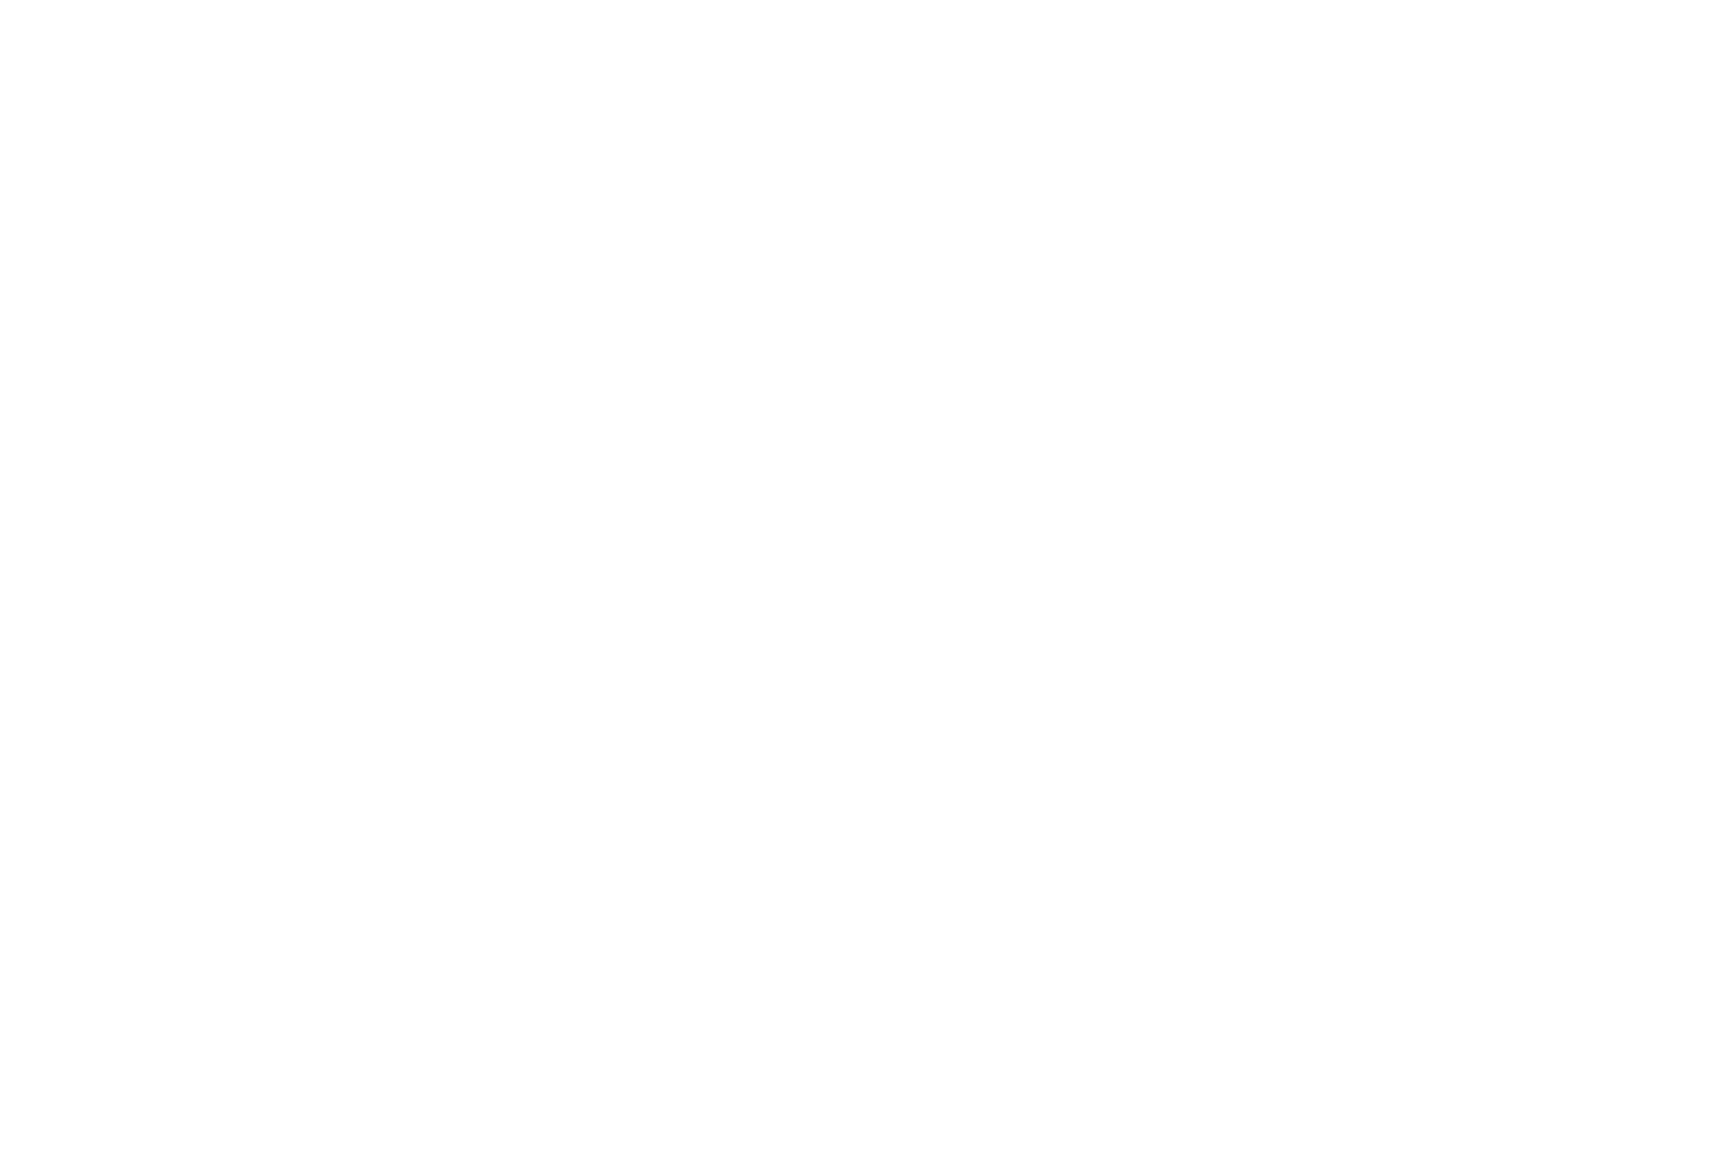 Laurel for Official Selection at Bibliocurts Film Festival awarded to 'Street Talk' in 2017